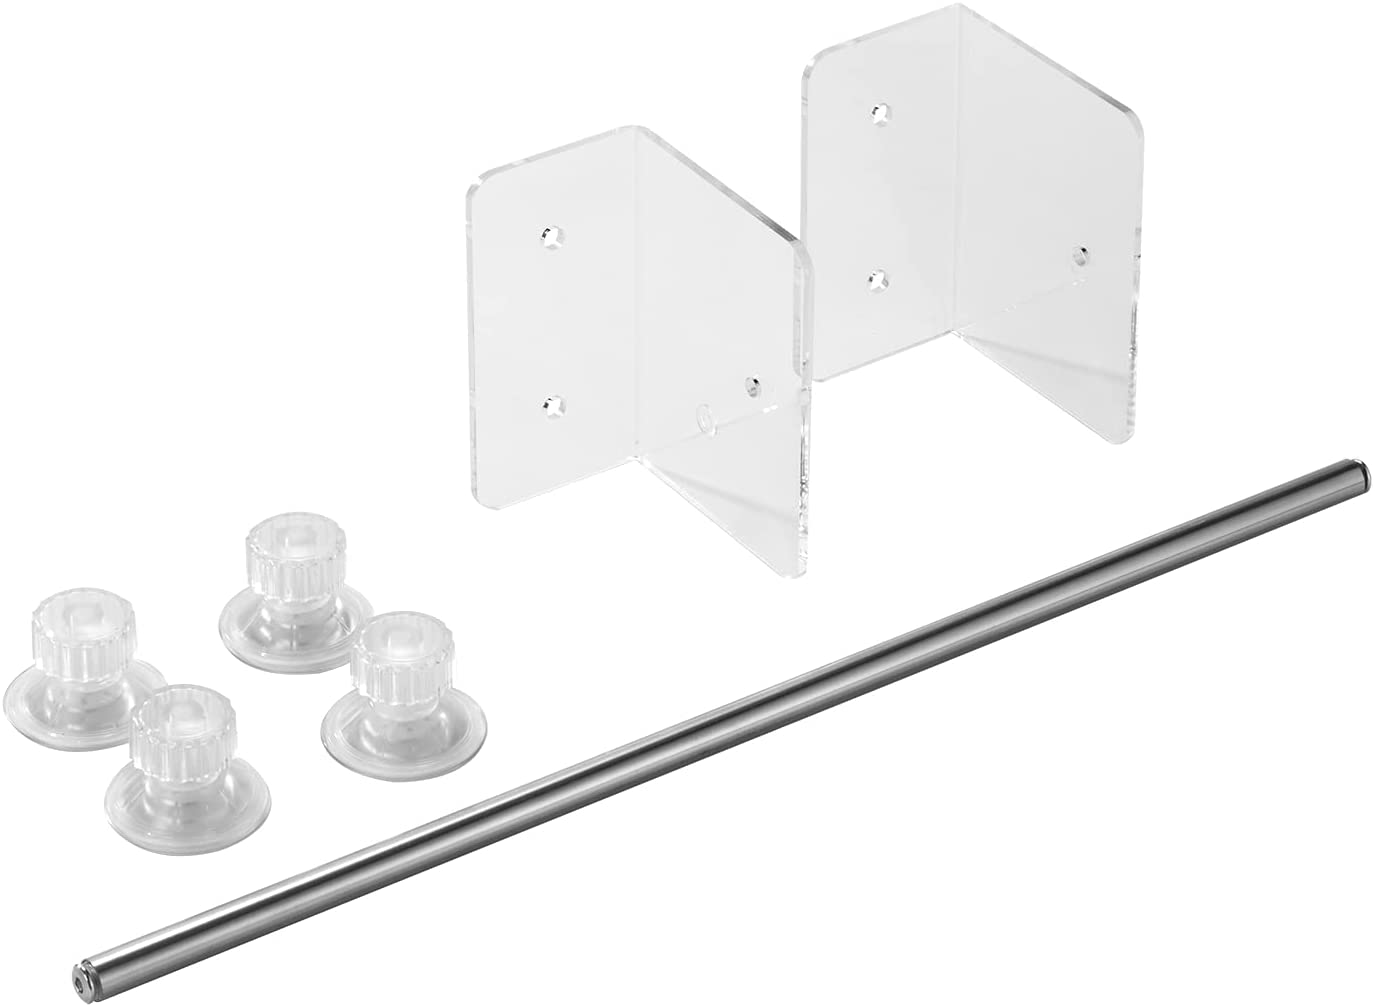 Stainless Steel Towel Bar with Suction Cup